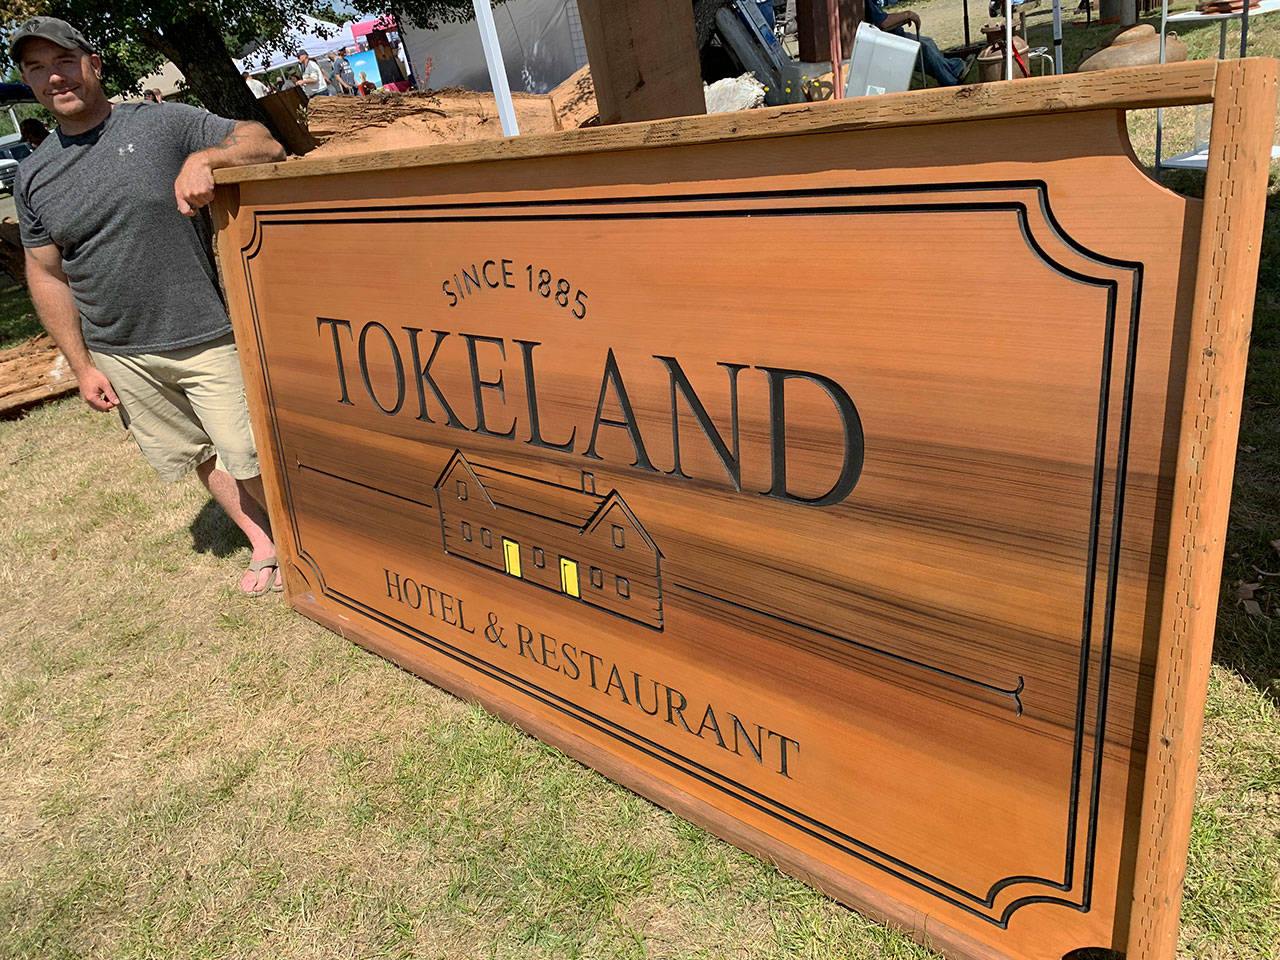 daily world File photo 
Shoalwater Bay woodcarver Earl Davis displayed this cedar sign he created for the Tokeland Hotel at the 2019 Tokeland Woodfest.